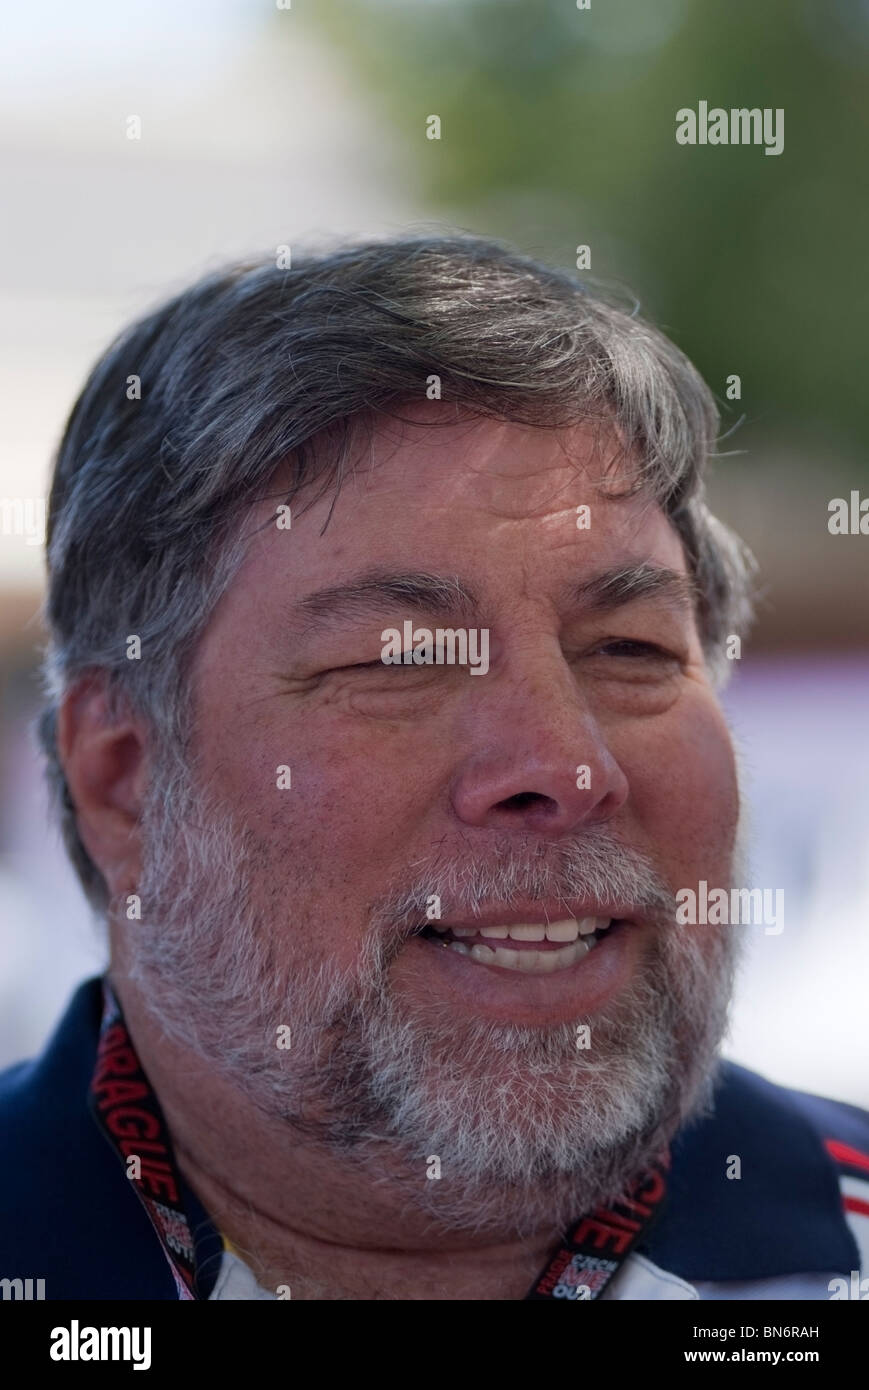 Steve Wozniak, Apple Inc. co-founder was the Grand Marshall in the 2010 Rose, White & Blue 4th of July Parade in San Jose, CA. Stock Photo